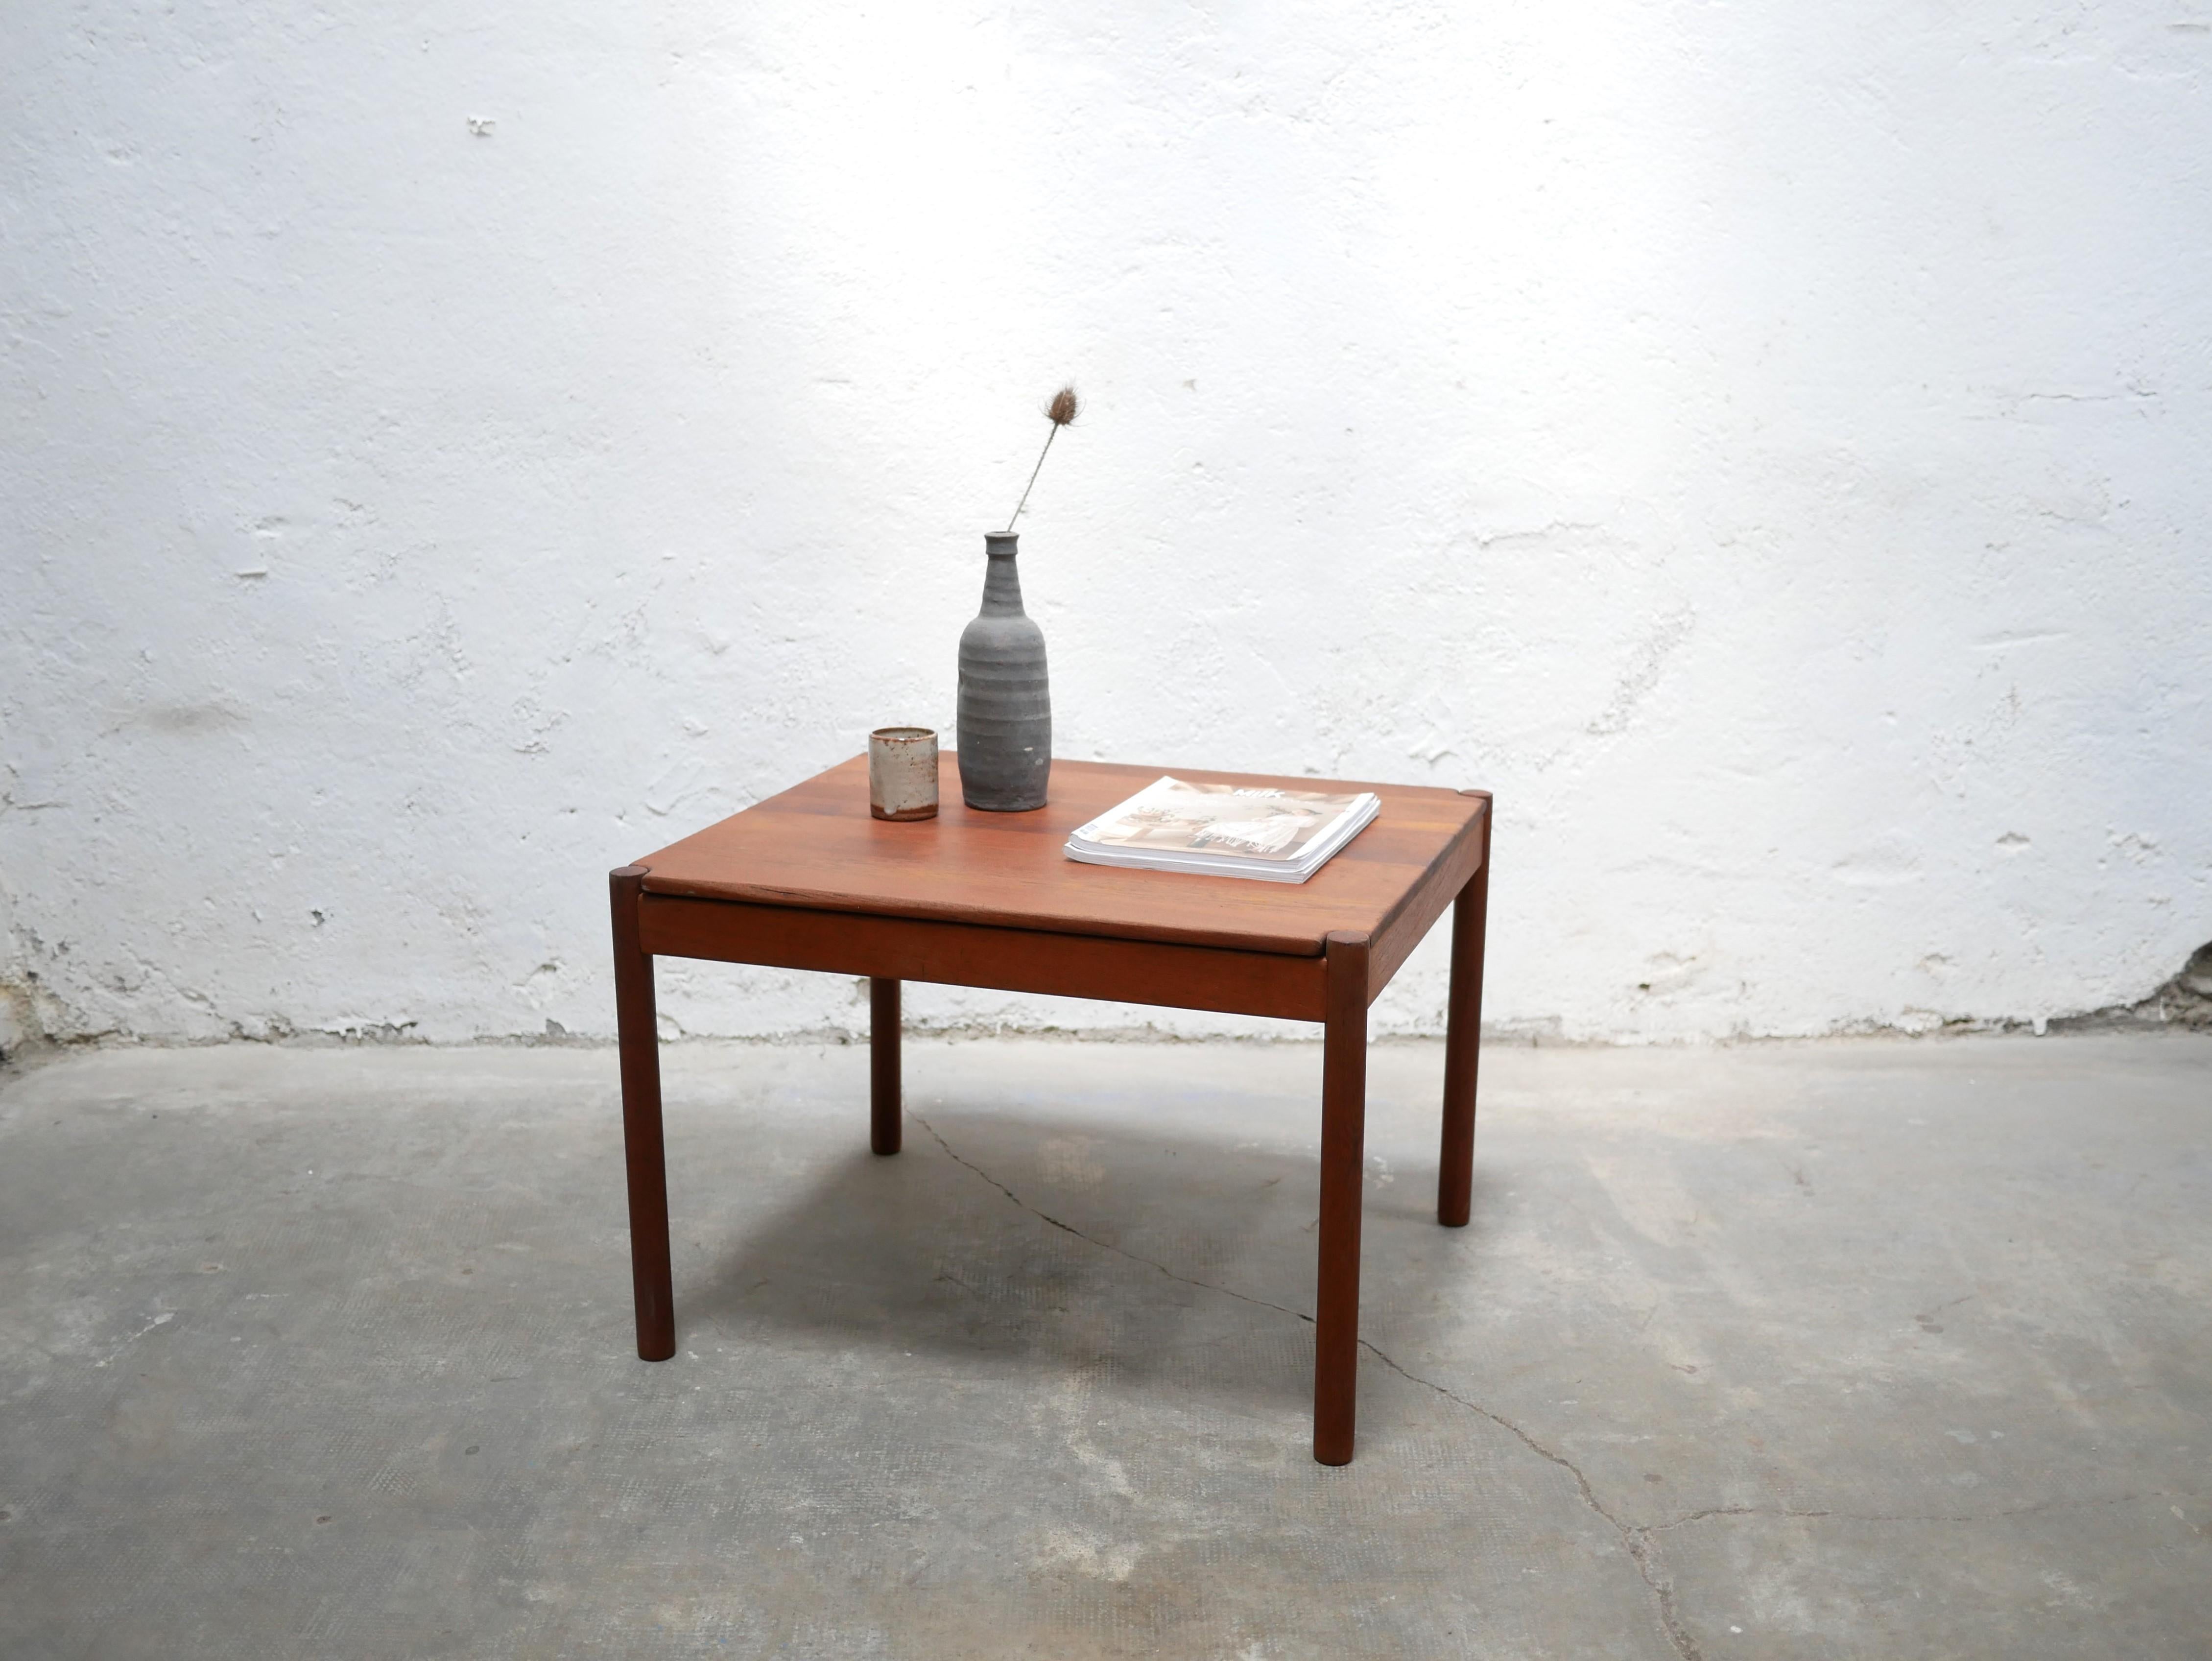 Teak coffee table produced in Denmark by Magnus Olesen A/S Durup in the 1960s.

Its simple and harmonious lines and its luminous color bring it a lot of charm and softness.
It will be perfect in the living room, in a current and trendy